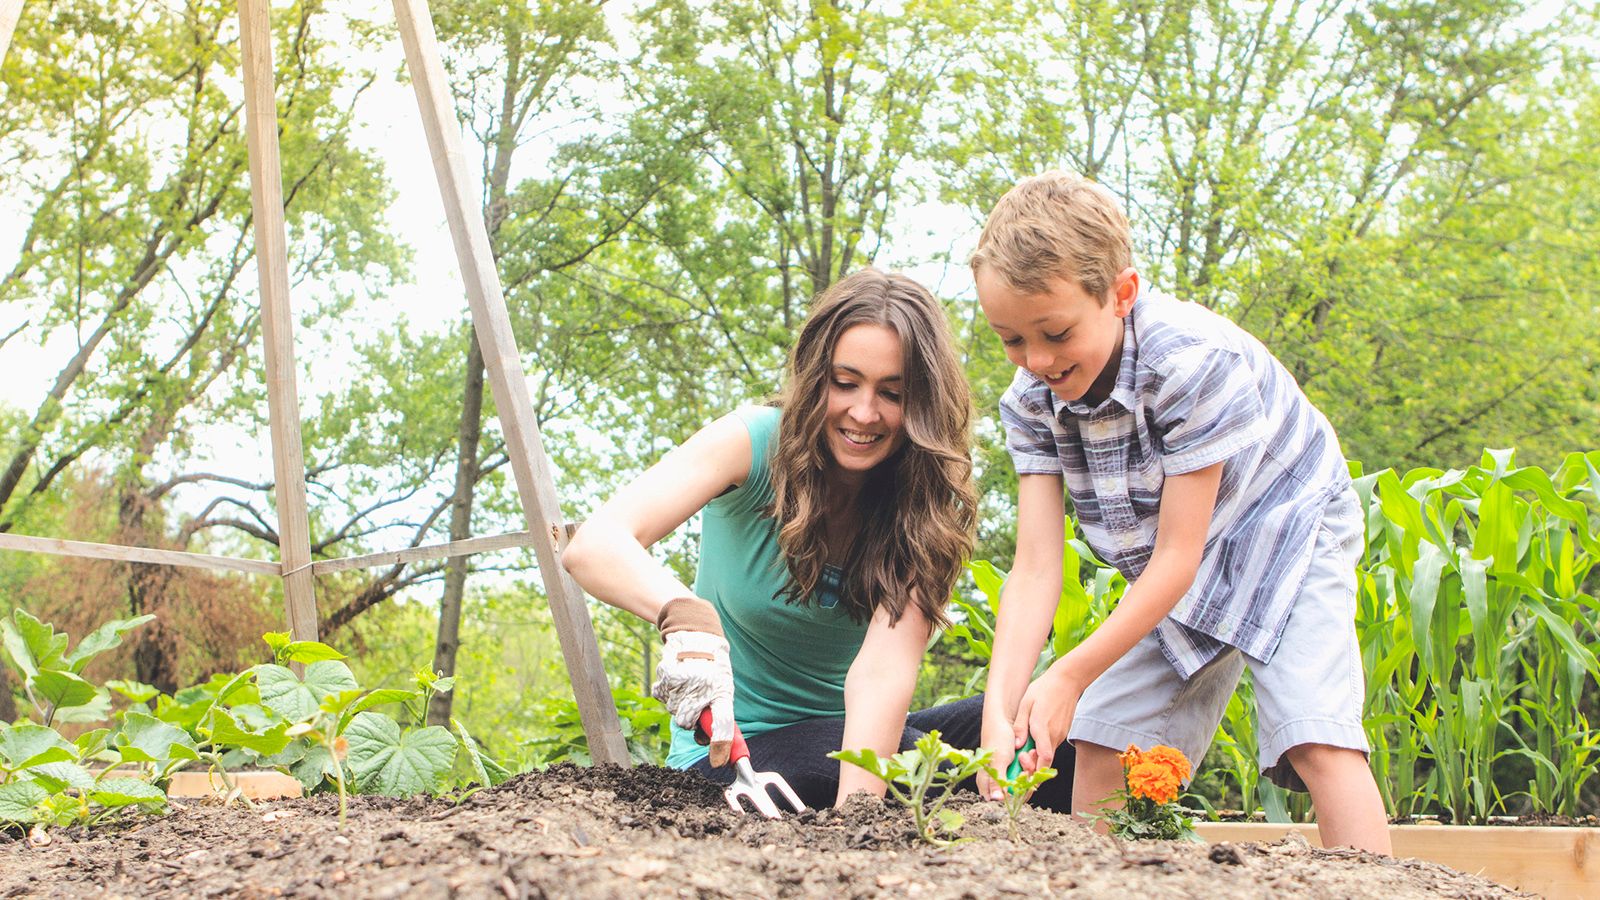 Cultivate Your Personal Garden: Strategies for Excelling In  Discipleship